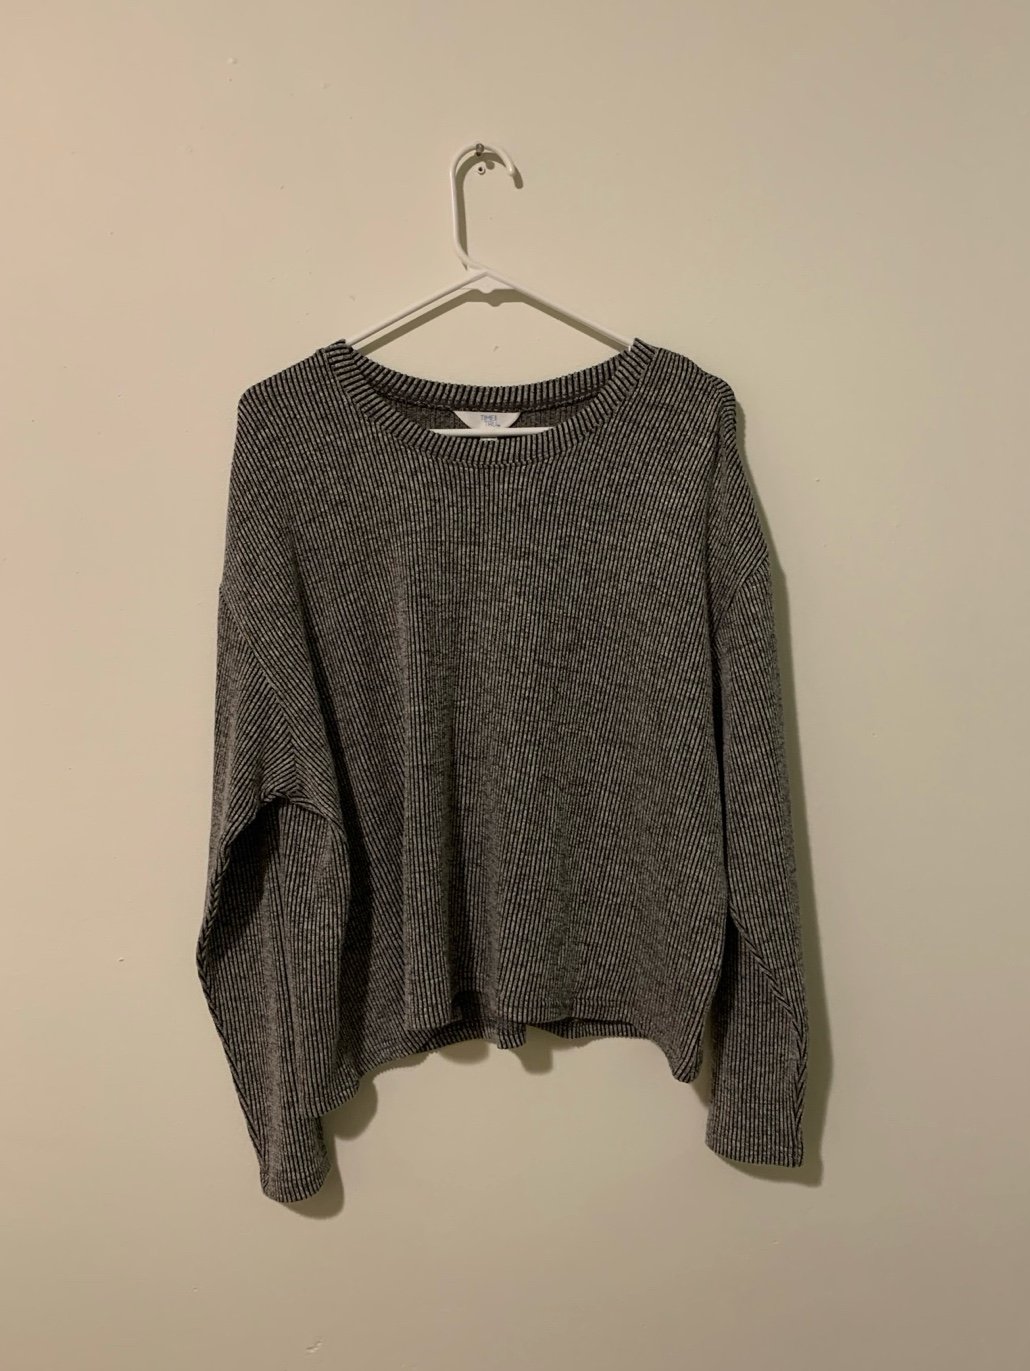 Wholesale price Sweater JCN4YAbsC well sale